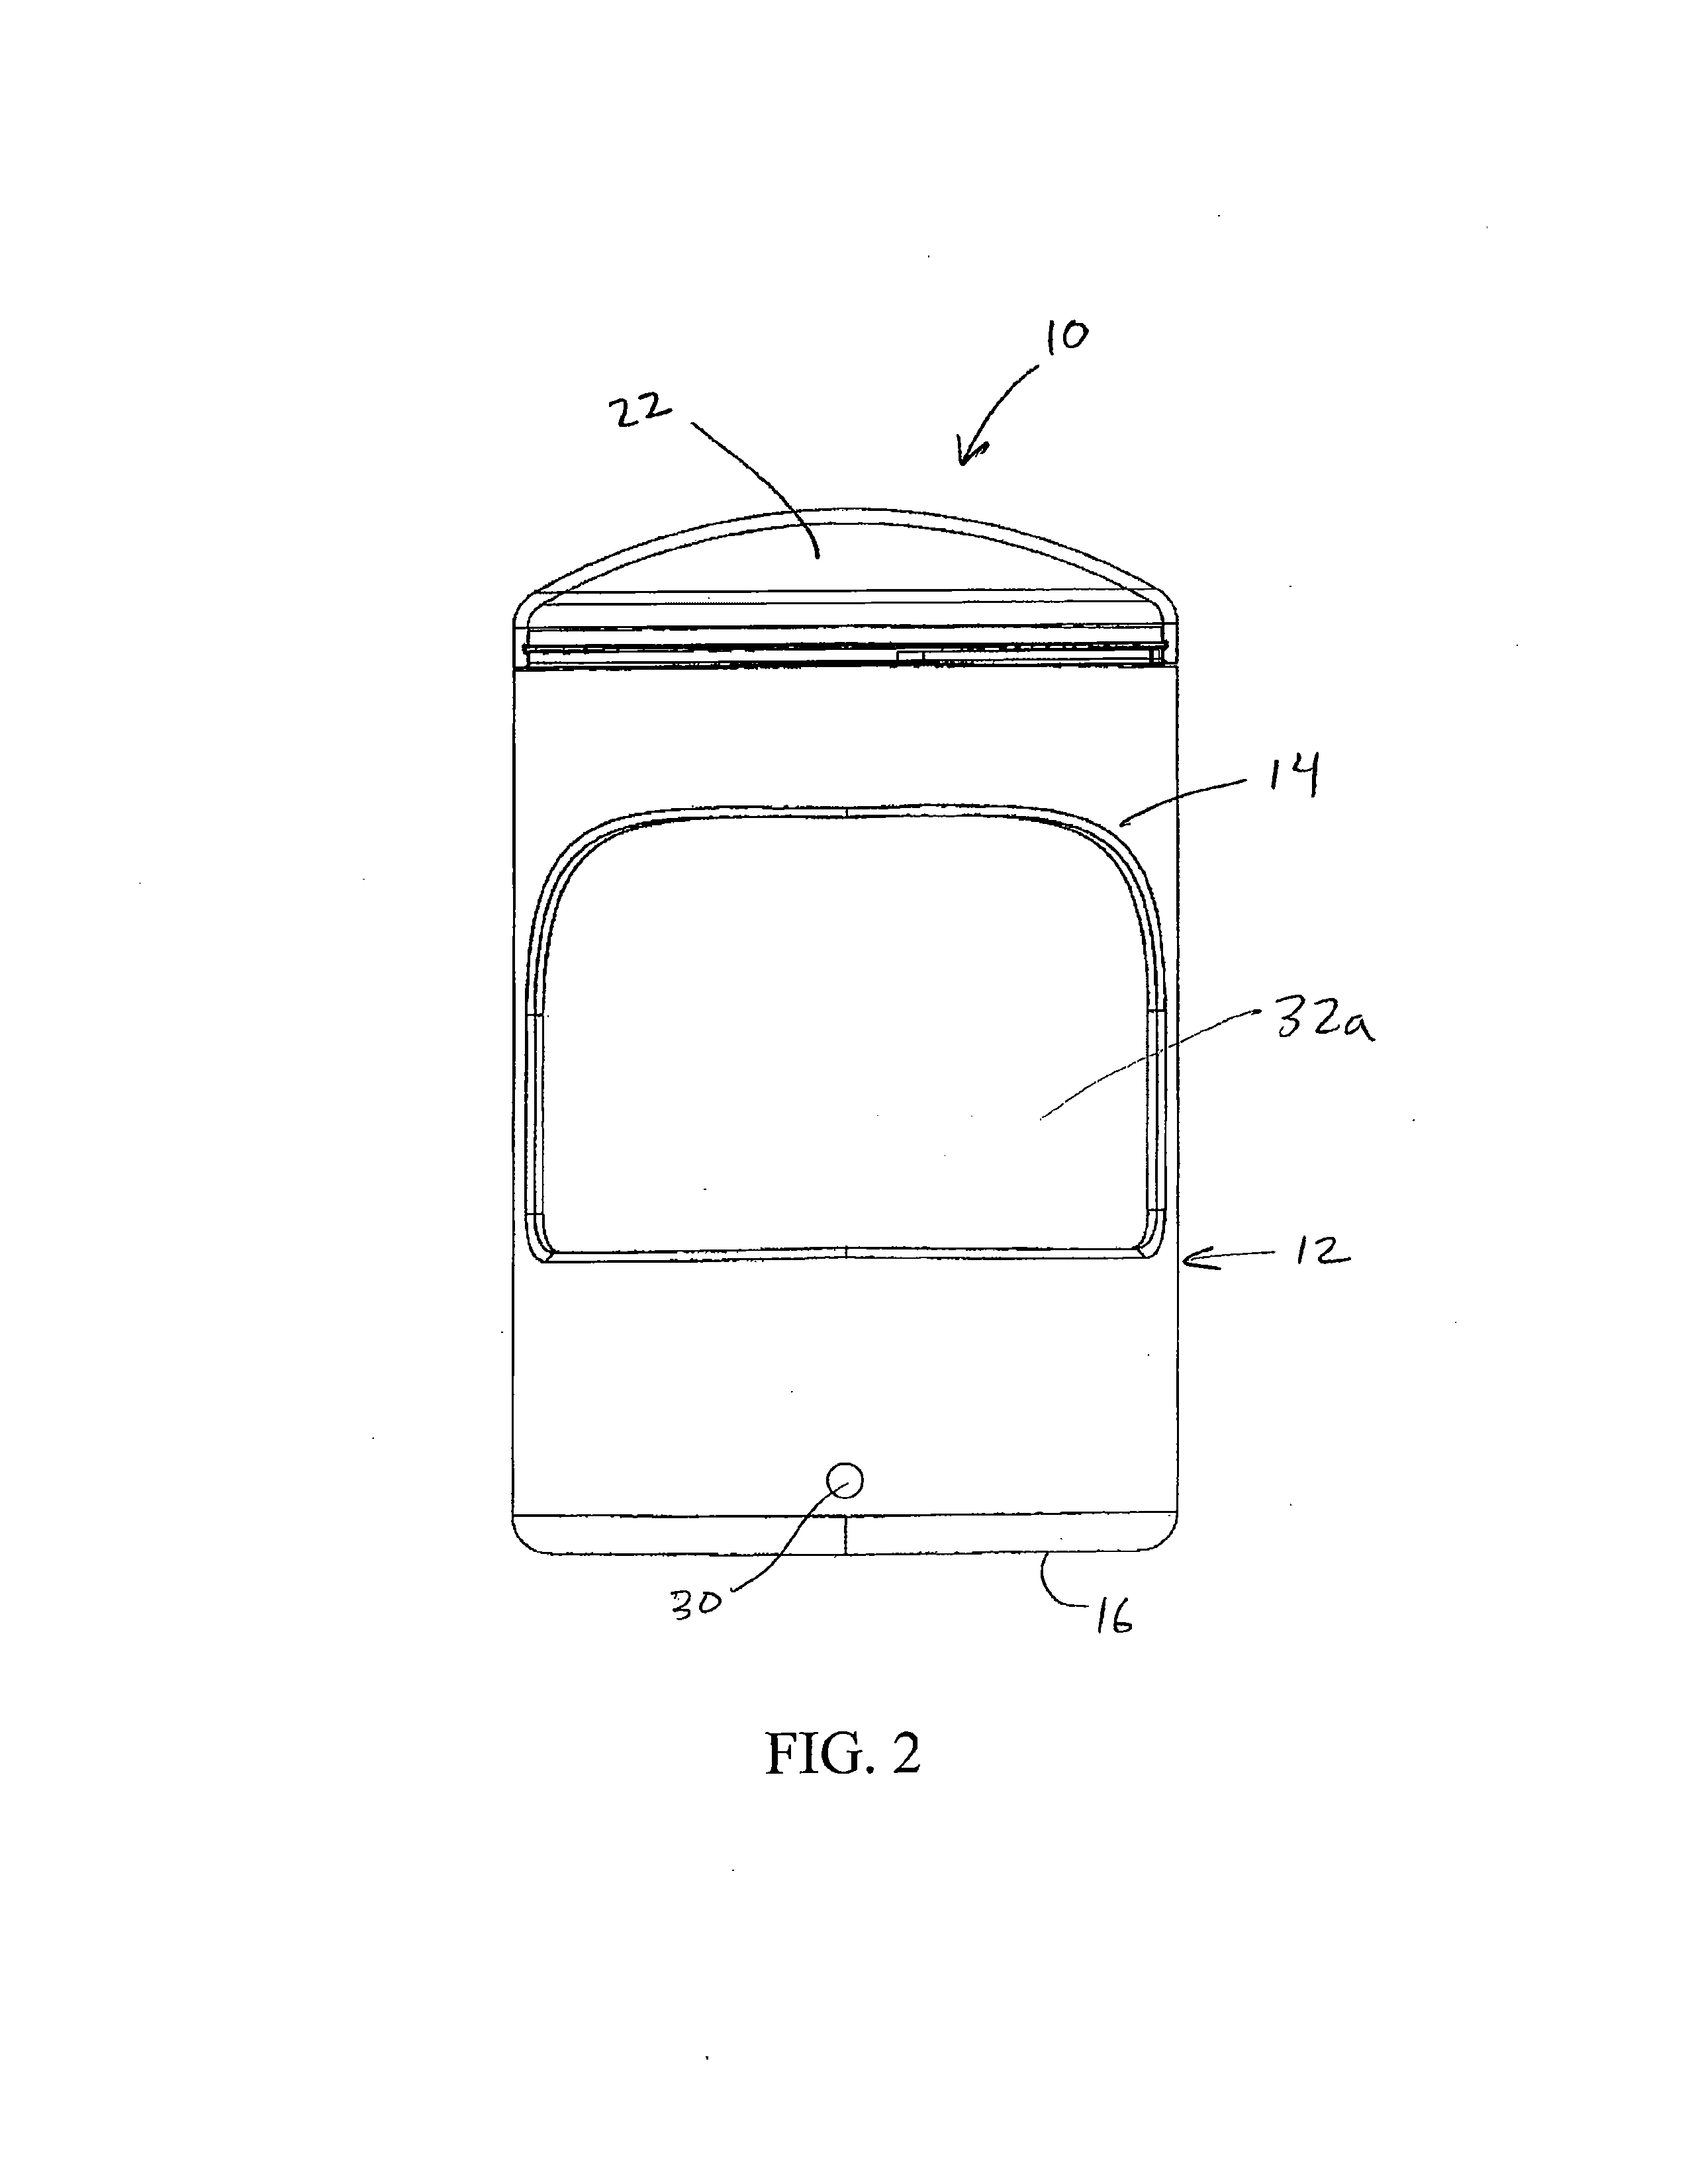 Ground-compacting device